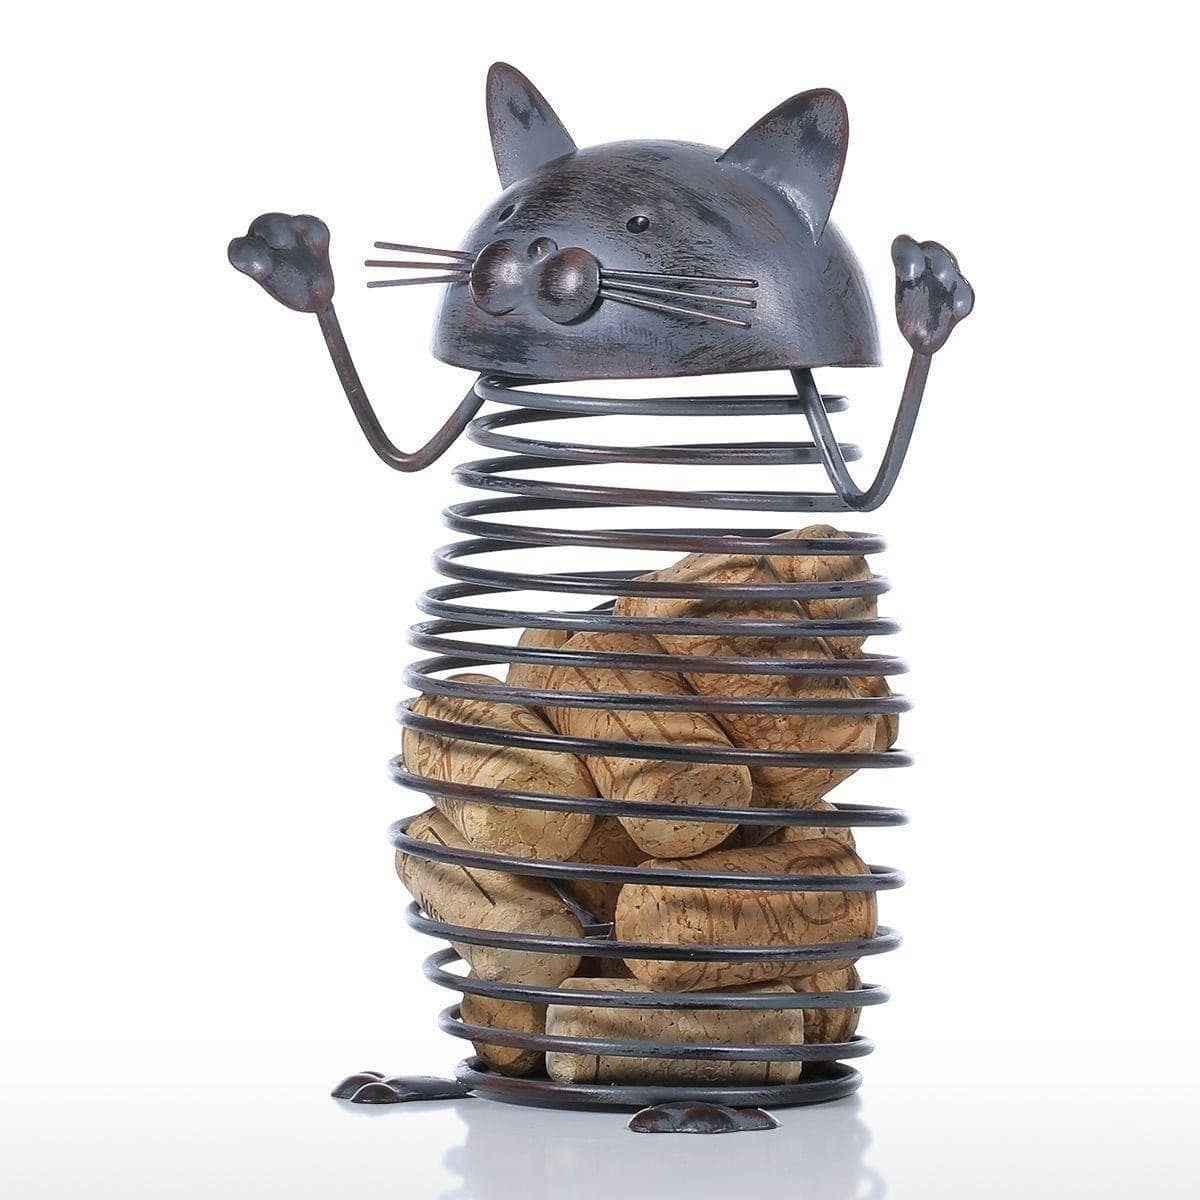 Whimsical Spring Cat Wine Bottle Holder Stand: Fun Home Decor